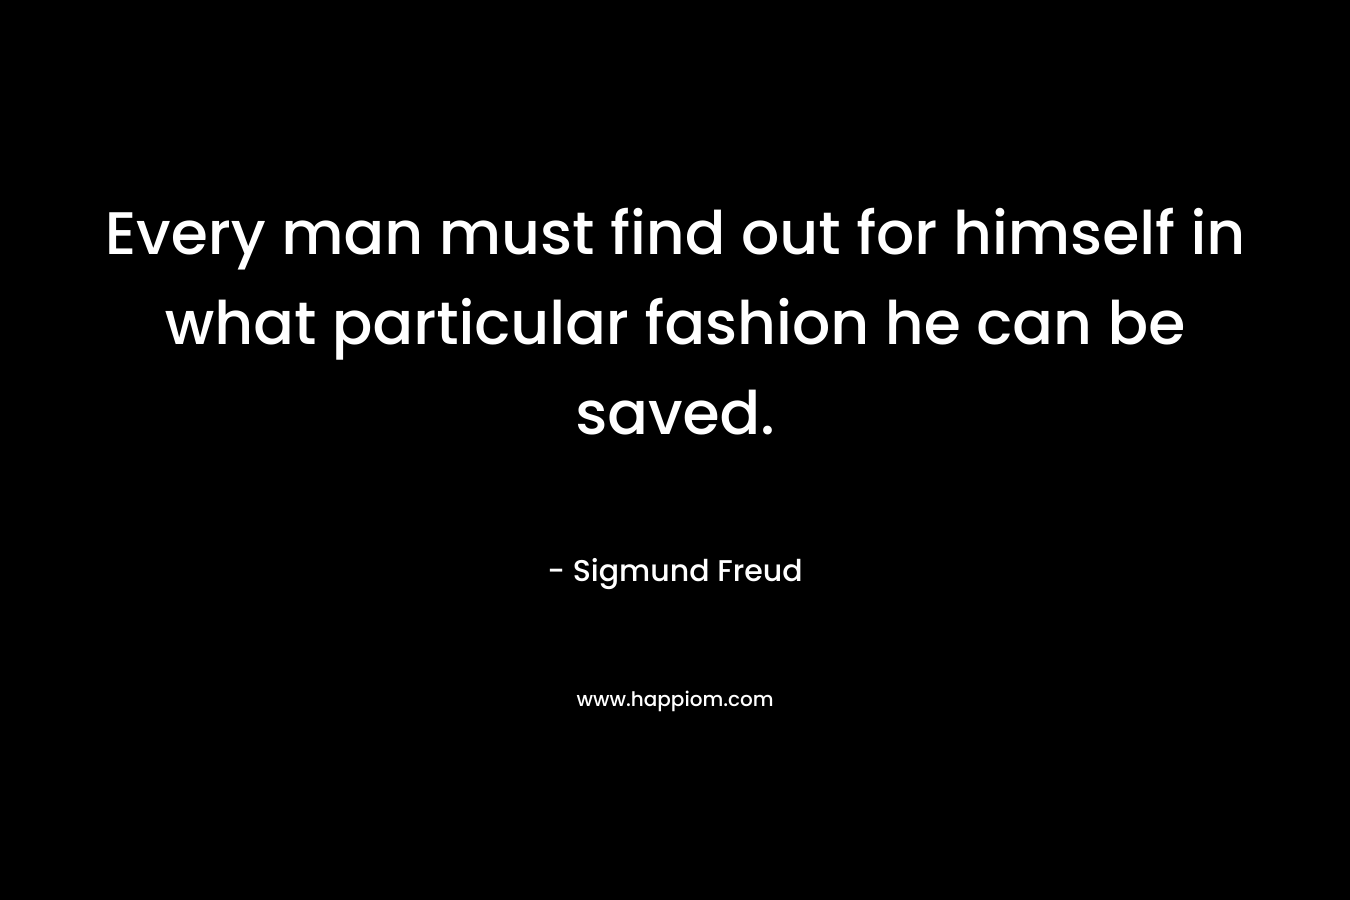 Every man must find out for himself in what particular fashion he can be saved.